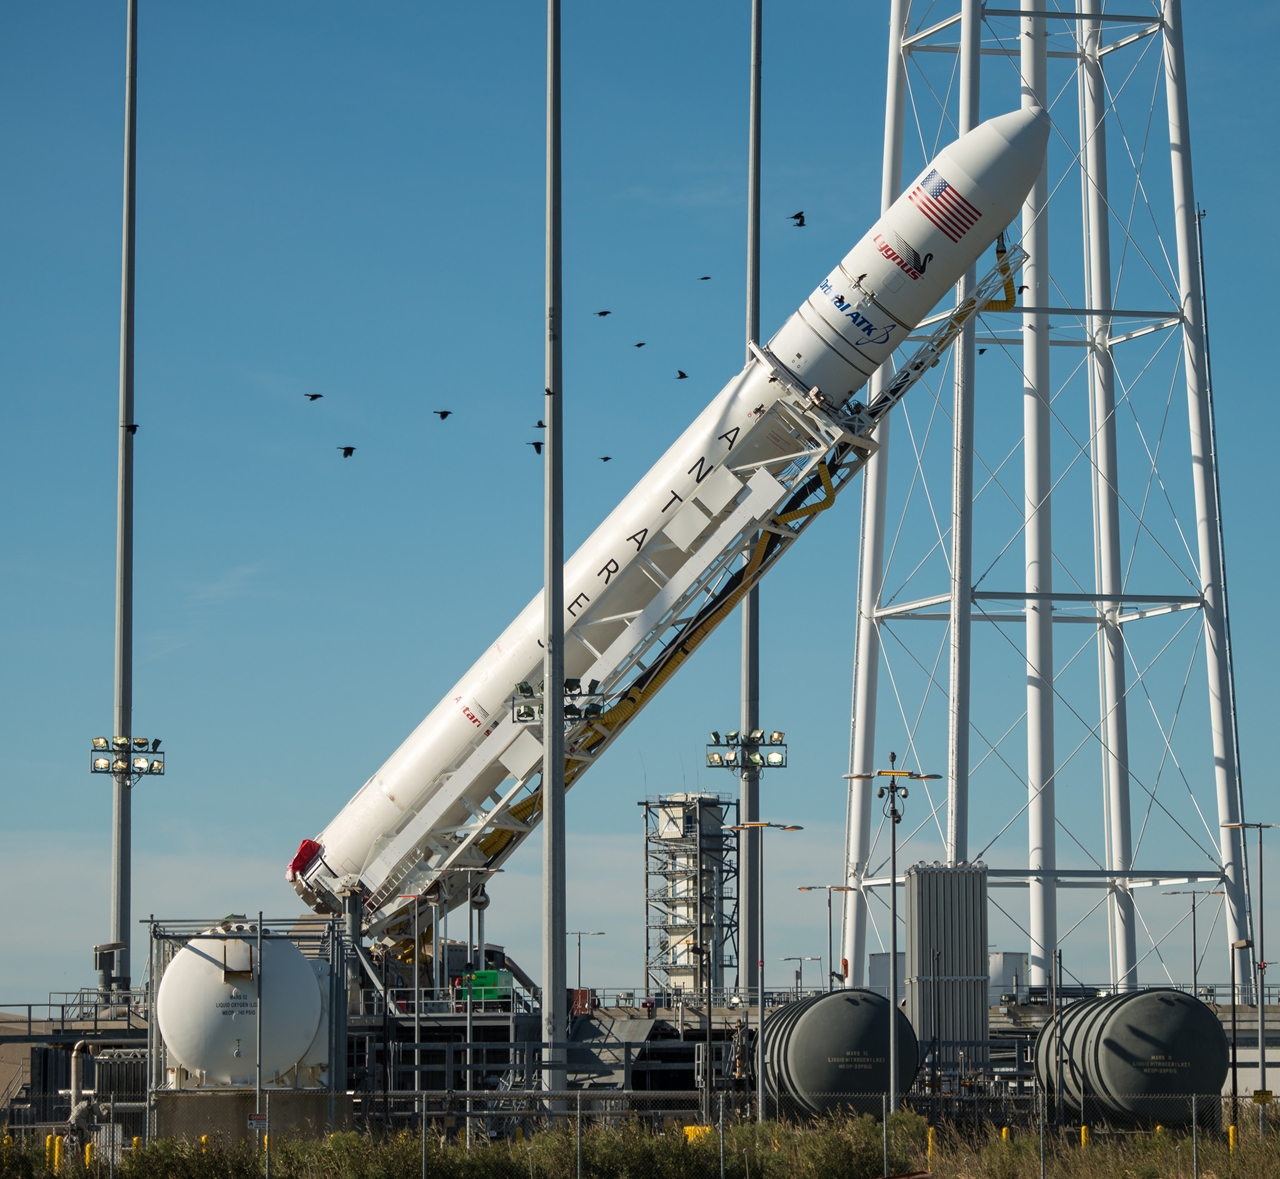 photos-of-the-launch-of-the-russian-spacecraft-soyuz-ms-02-and-the-american-antares-15